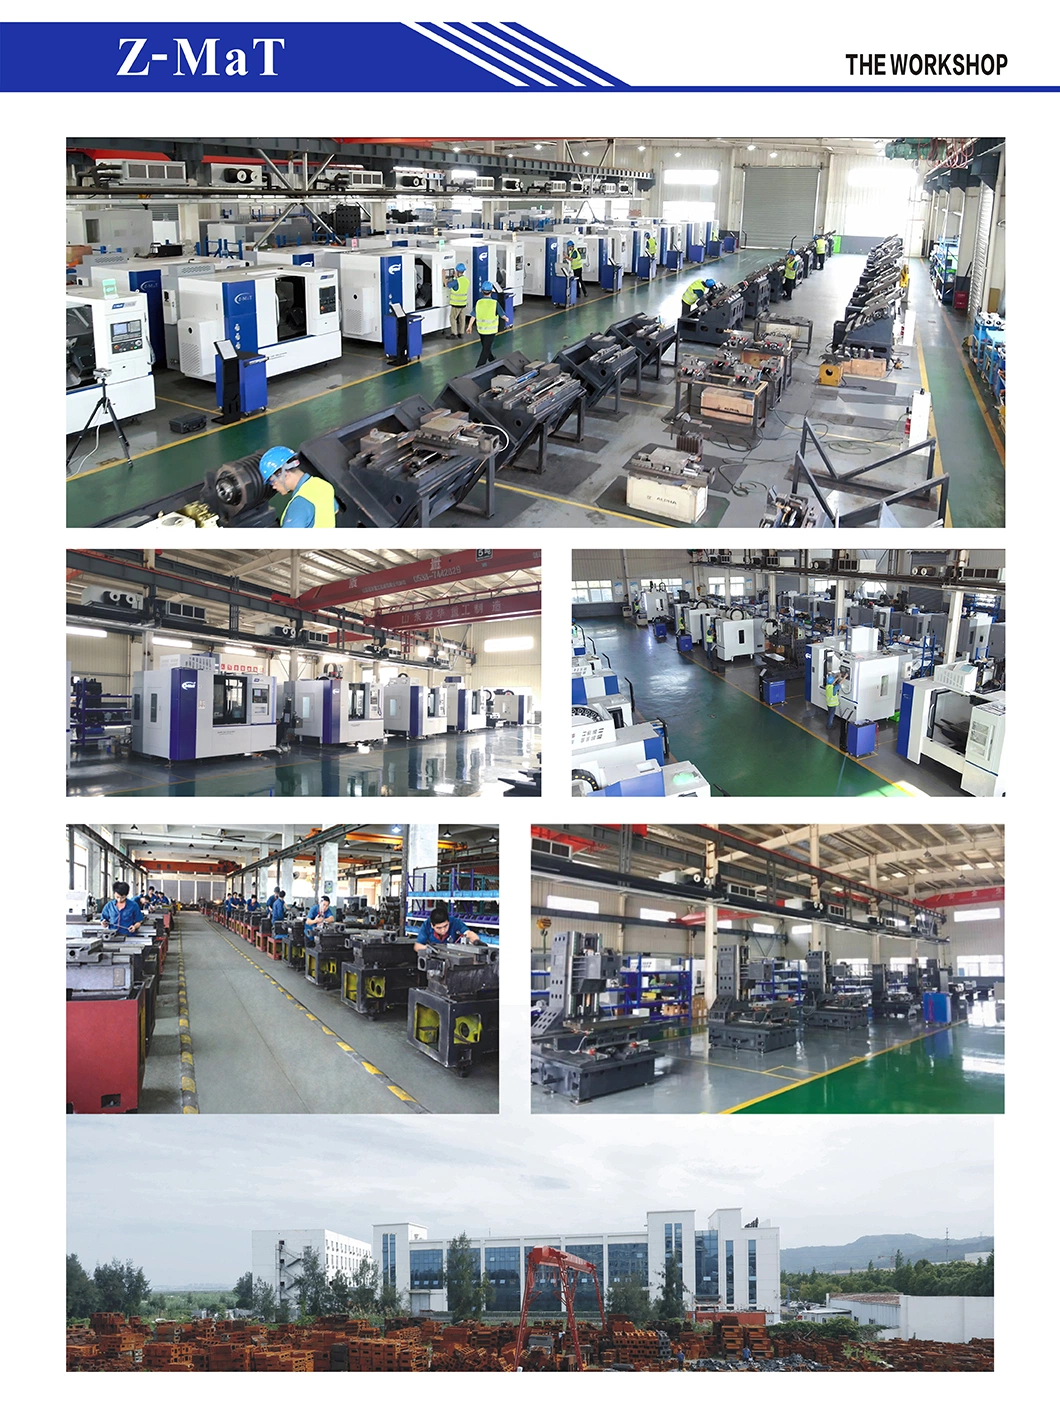 Dual Spindle Turning Center/ Driven Tool Turret/ CNC Lathe/ Precision Turning Lathe/CNC machine with CE and ISO(TC500 )